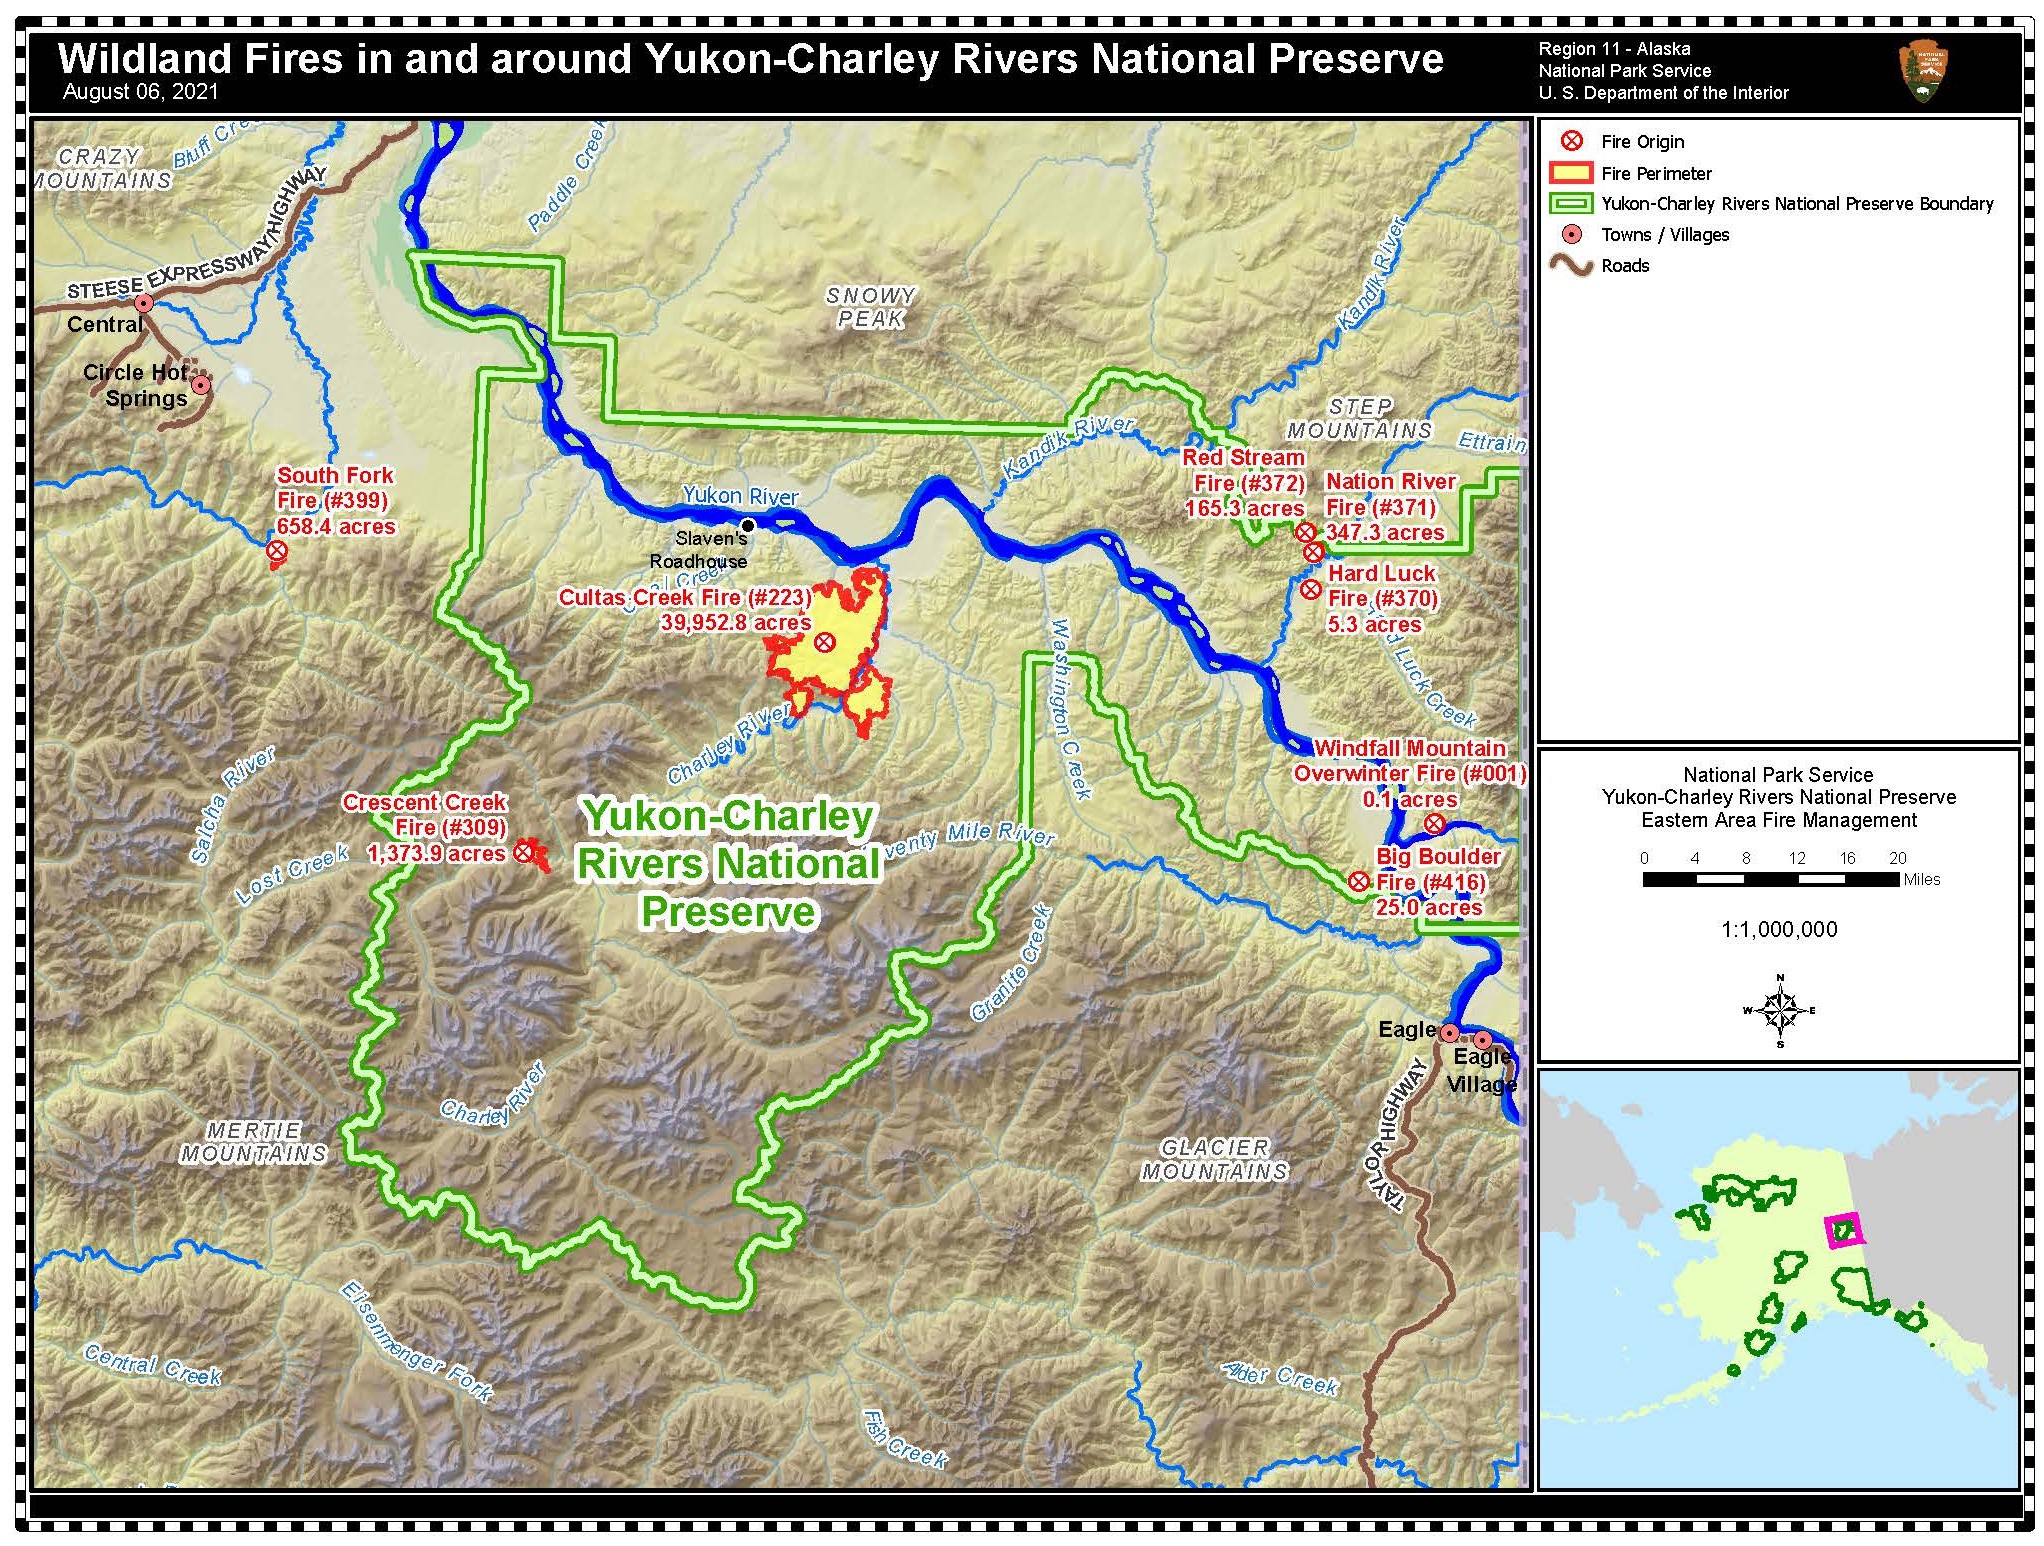 Fire map depicting fire locations and sizes in Yukon-Charley Rivers National Preserve